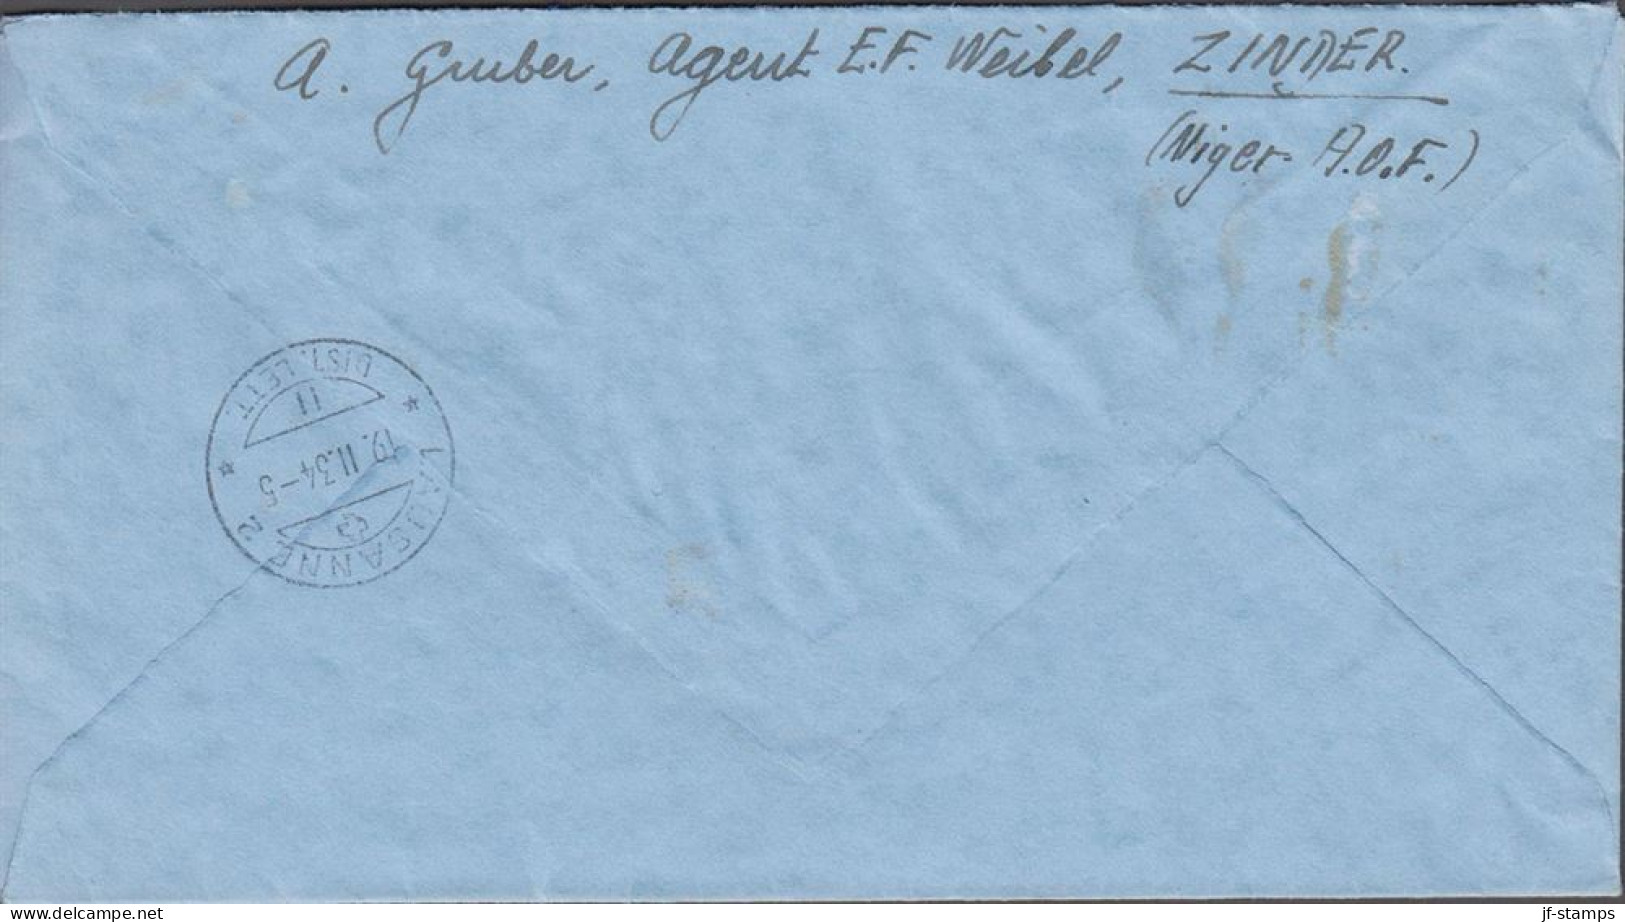 1934. NIGER. Rare Registered Cover To Lausanne, Suisse With Margin 4block (number B 23012 15)... (MICHEL 17+) - JF545402 - Usados